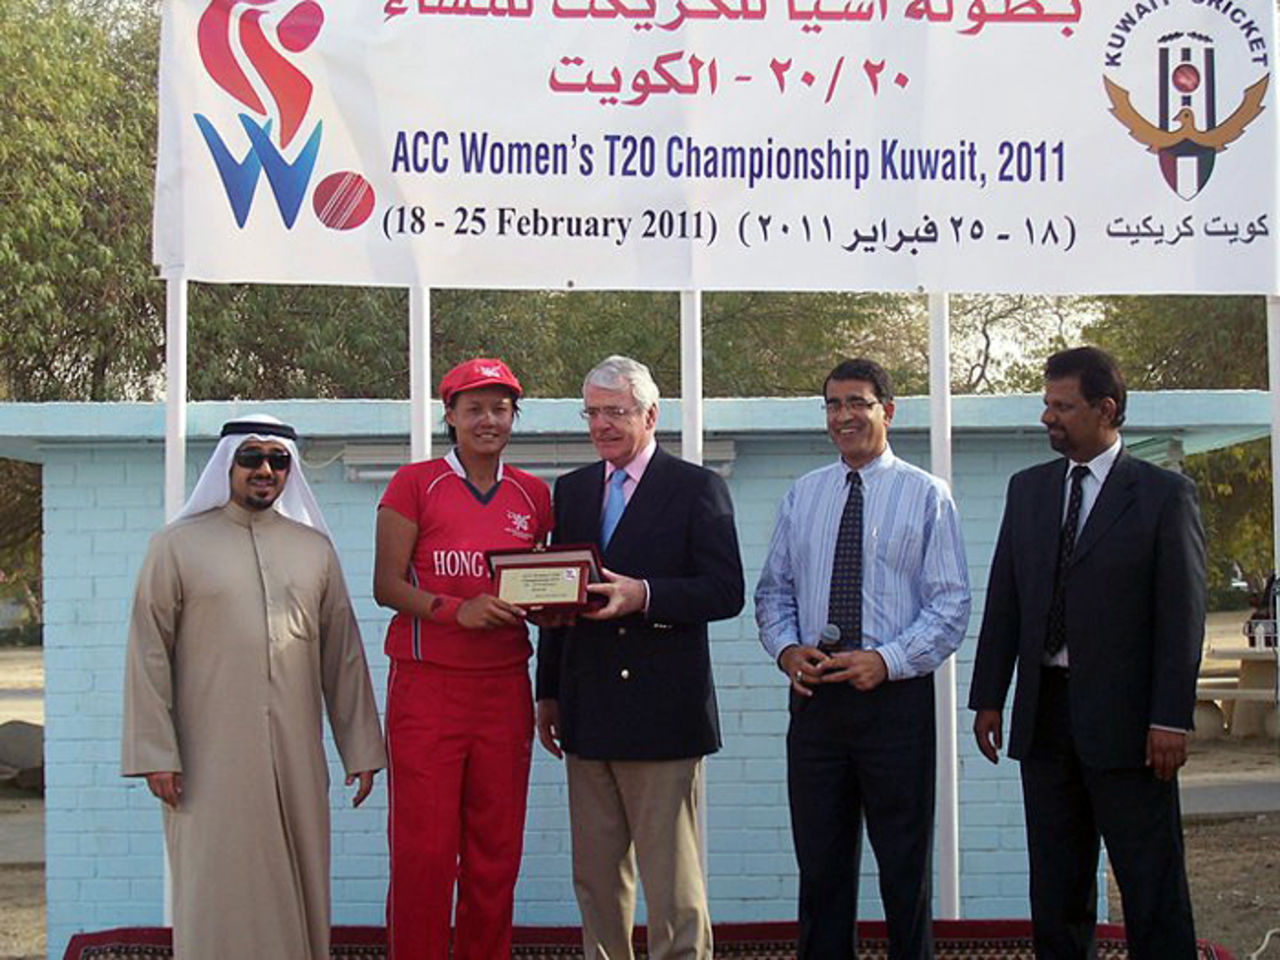 Connie Wong receives her Player of the Match award from former British Prime Minister John Major after Hong Kong beat Nepal in the ACC Women's Twenty20 semi-final played in Kuwait on 24th February 2011